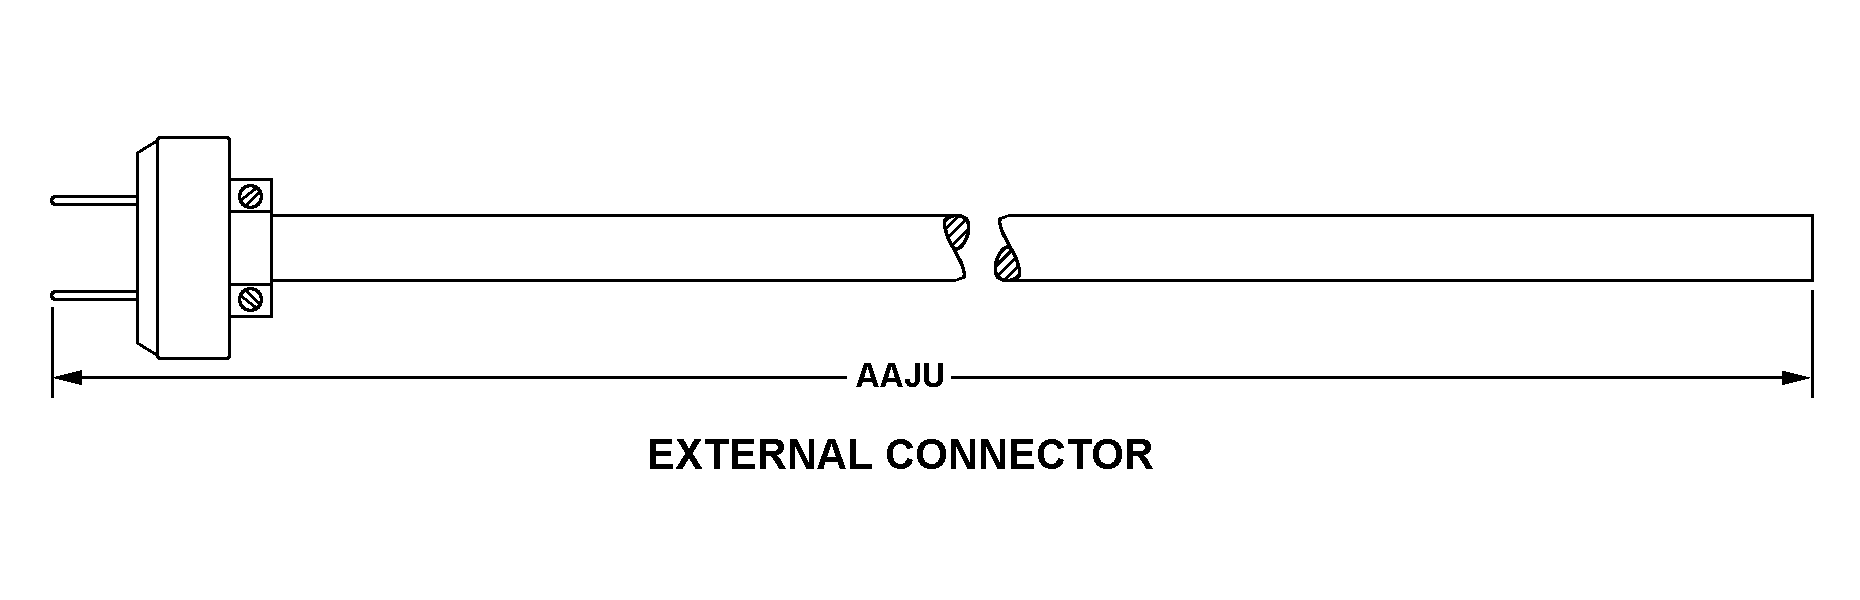 EXTERNAL CONNECTOR style nsn 5995-01-579-0307